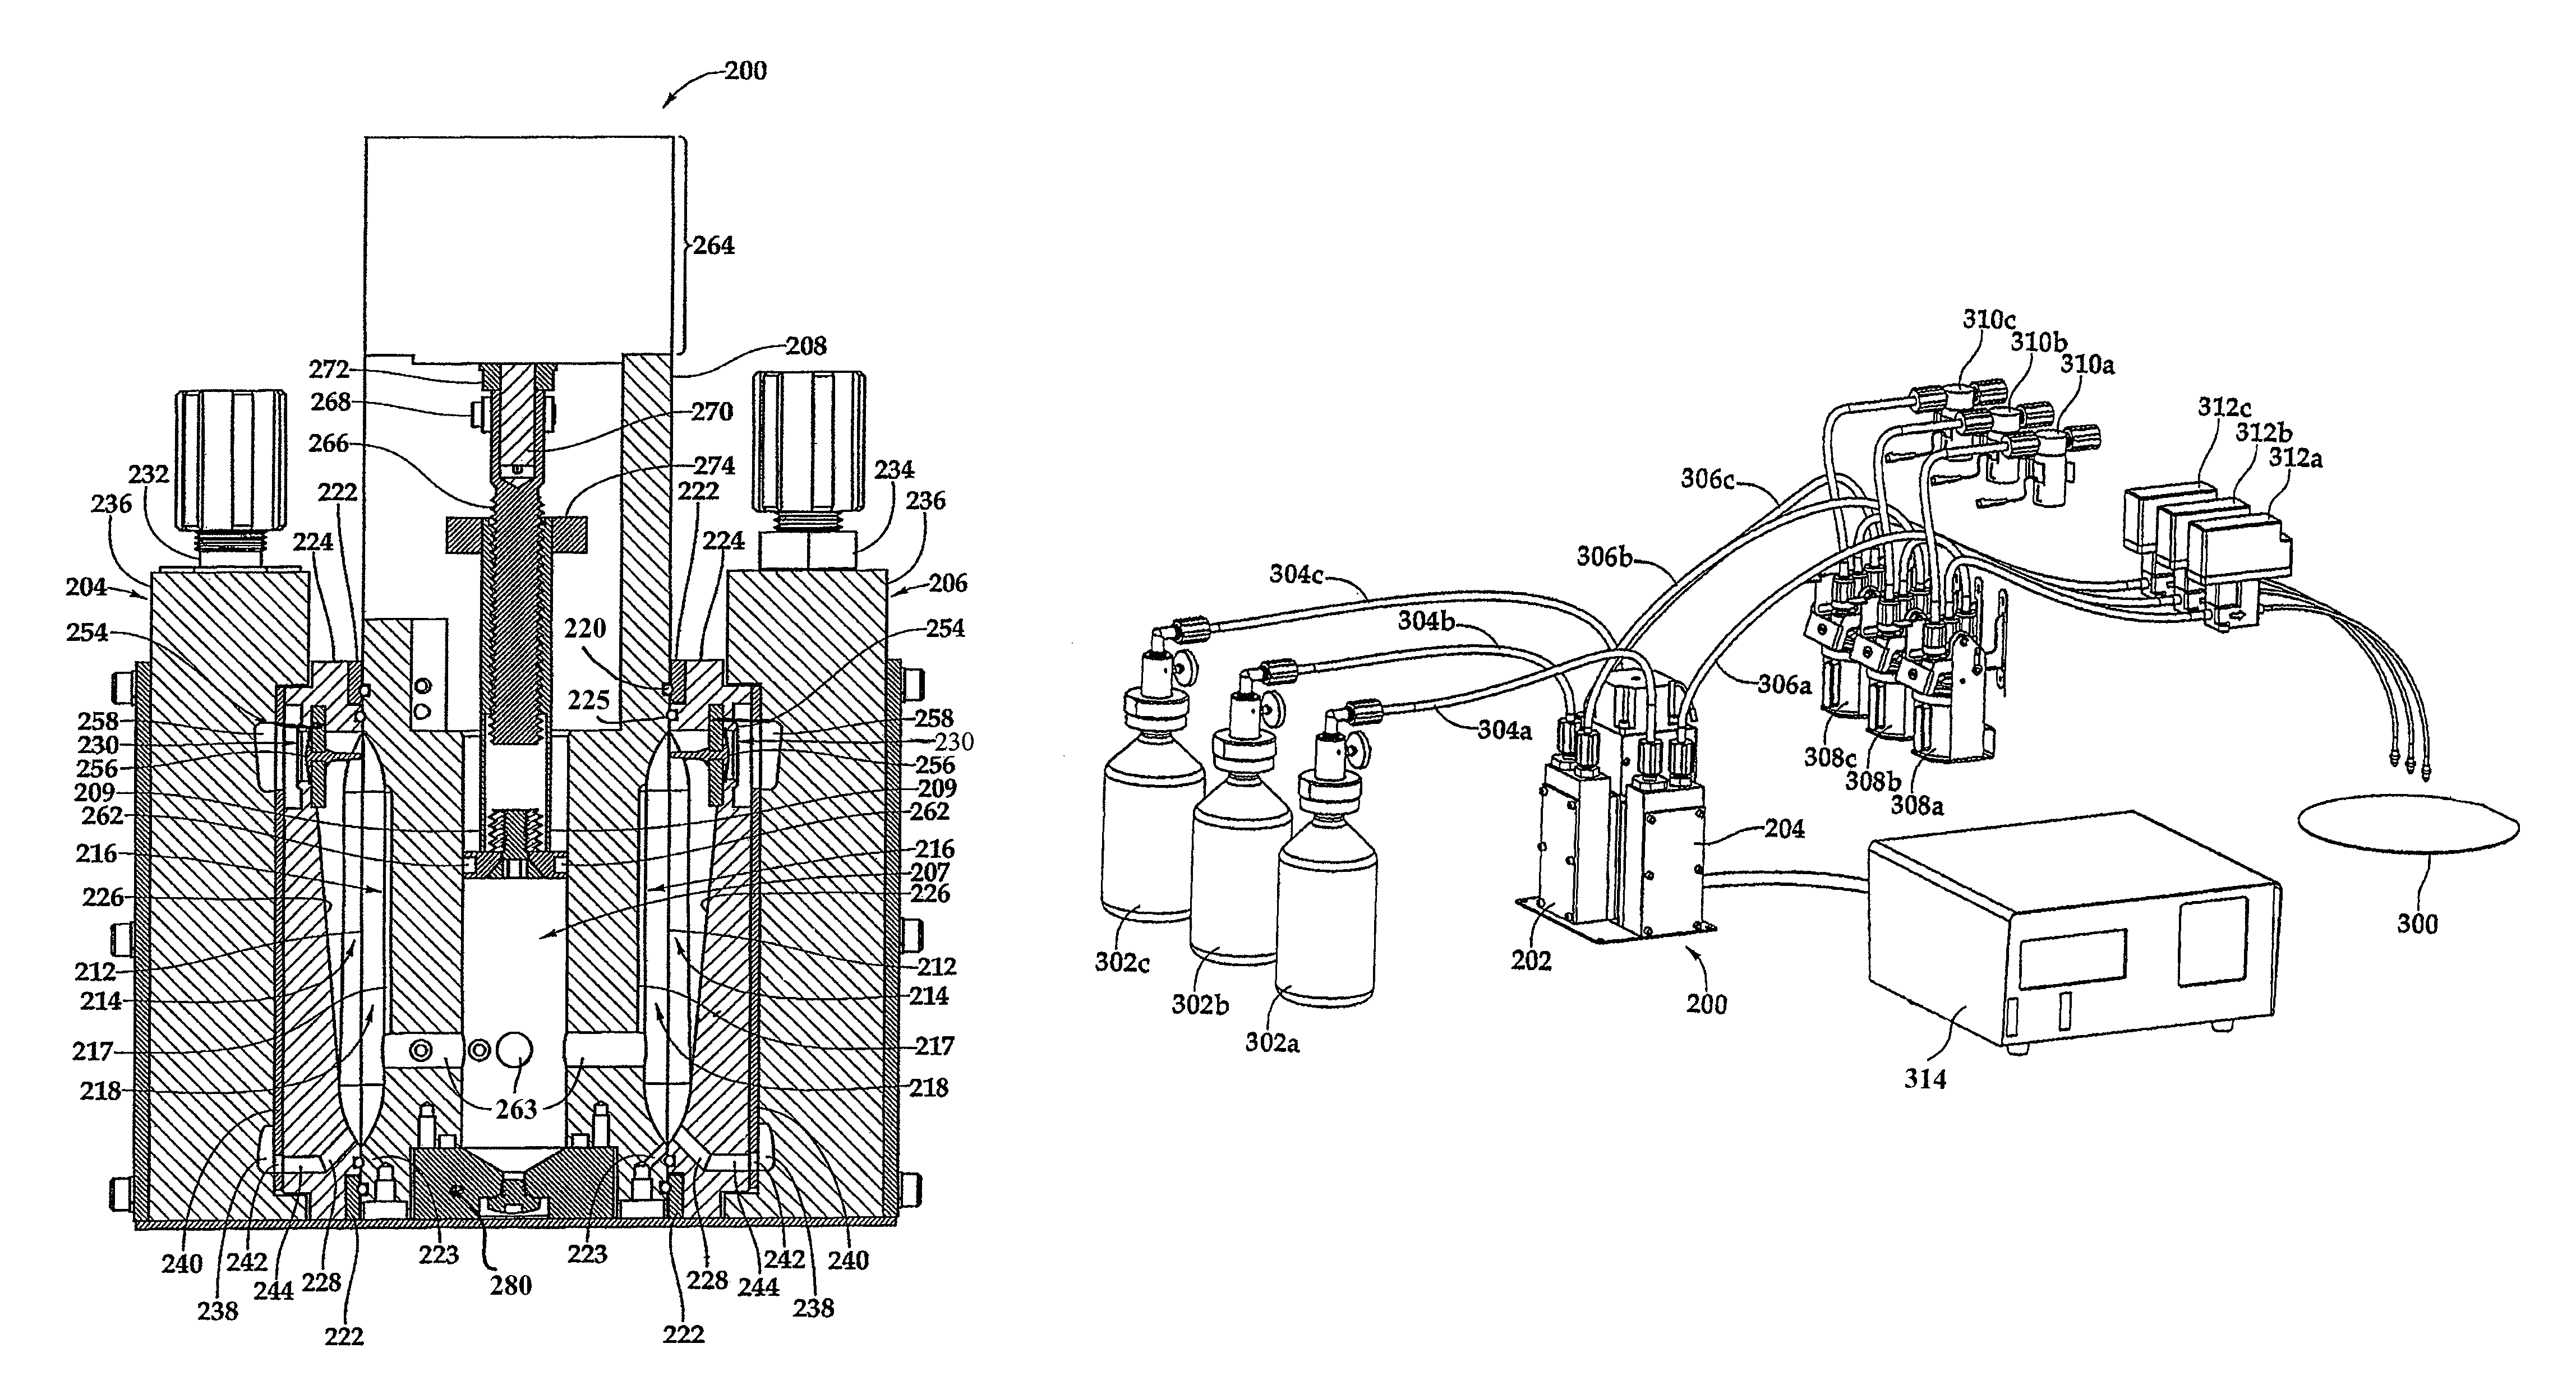 Precision pump having multiple heads and using an actuation fluid to pump one or more different process fluids